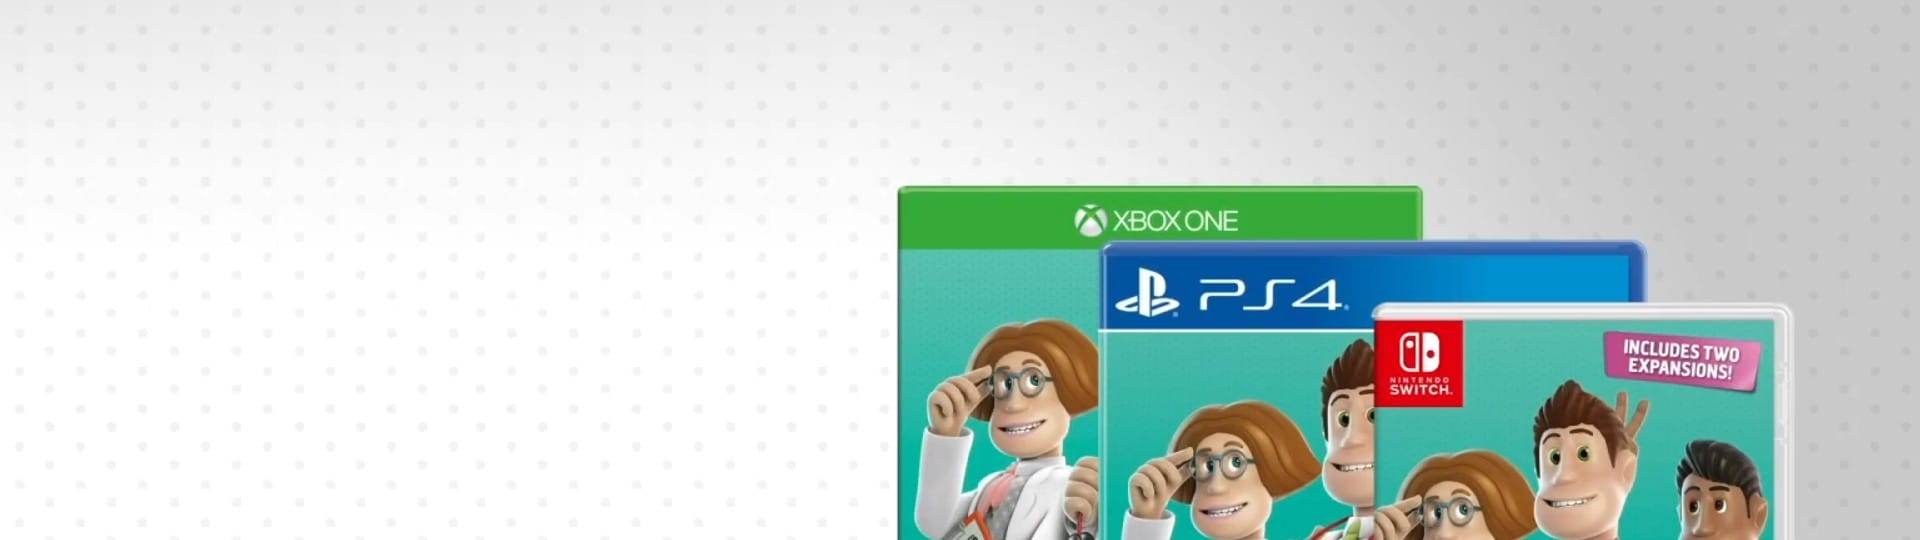 Two Point Hospital console release date boxes